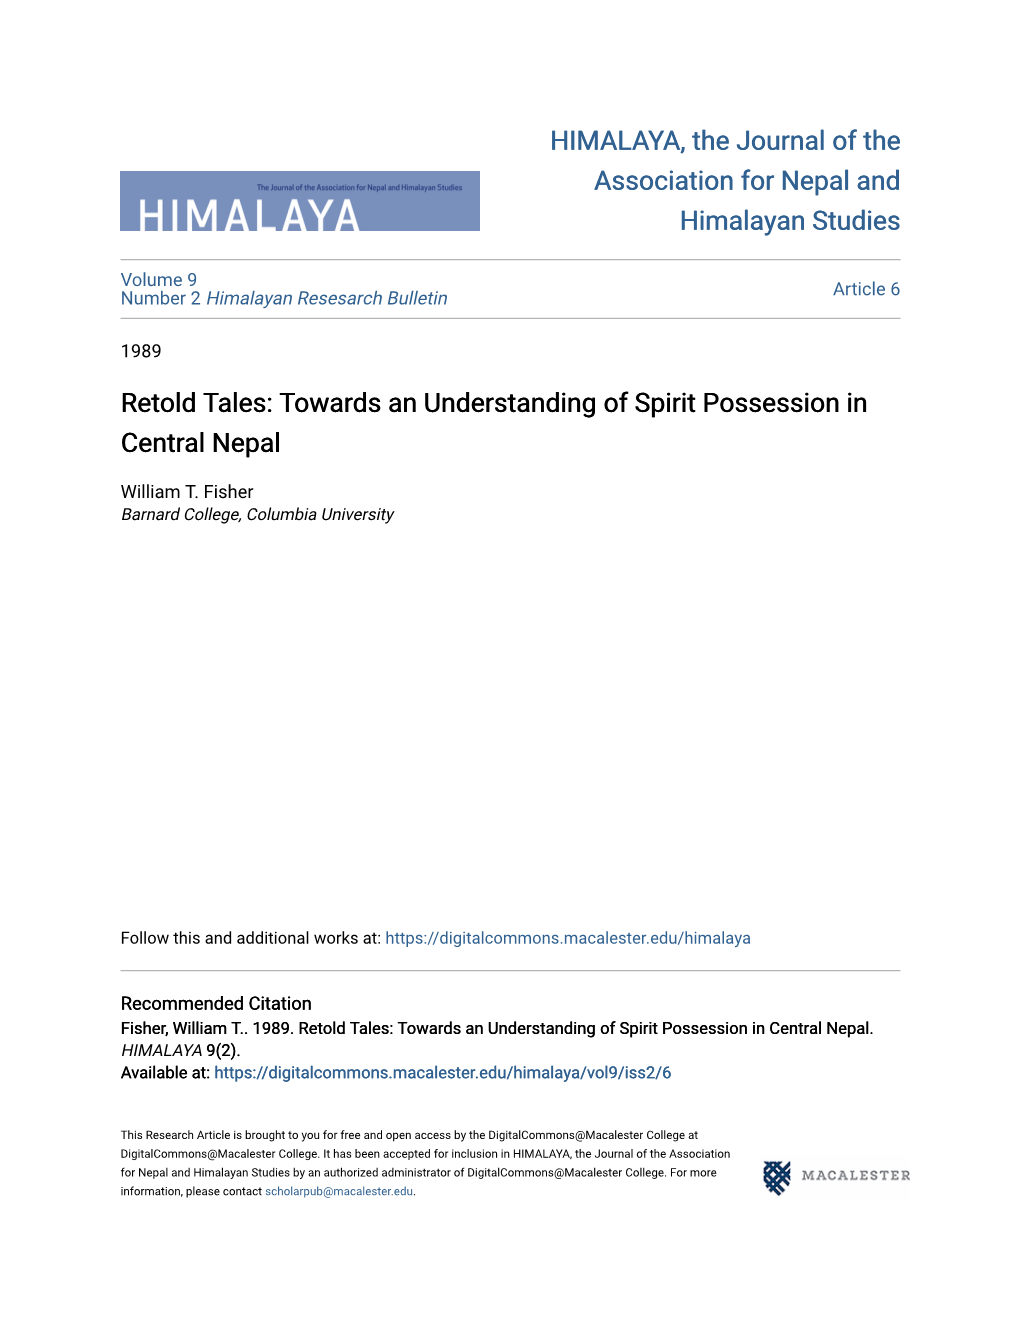 Towards an Understanding of Spirit Possession in Central Nepal